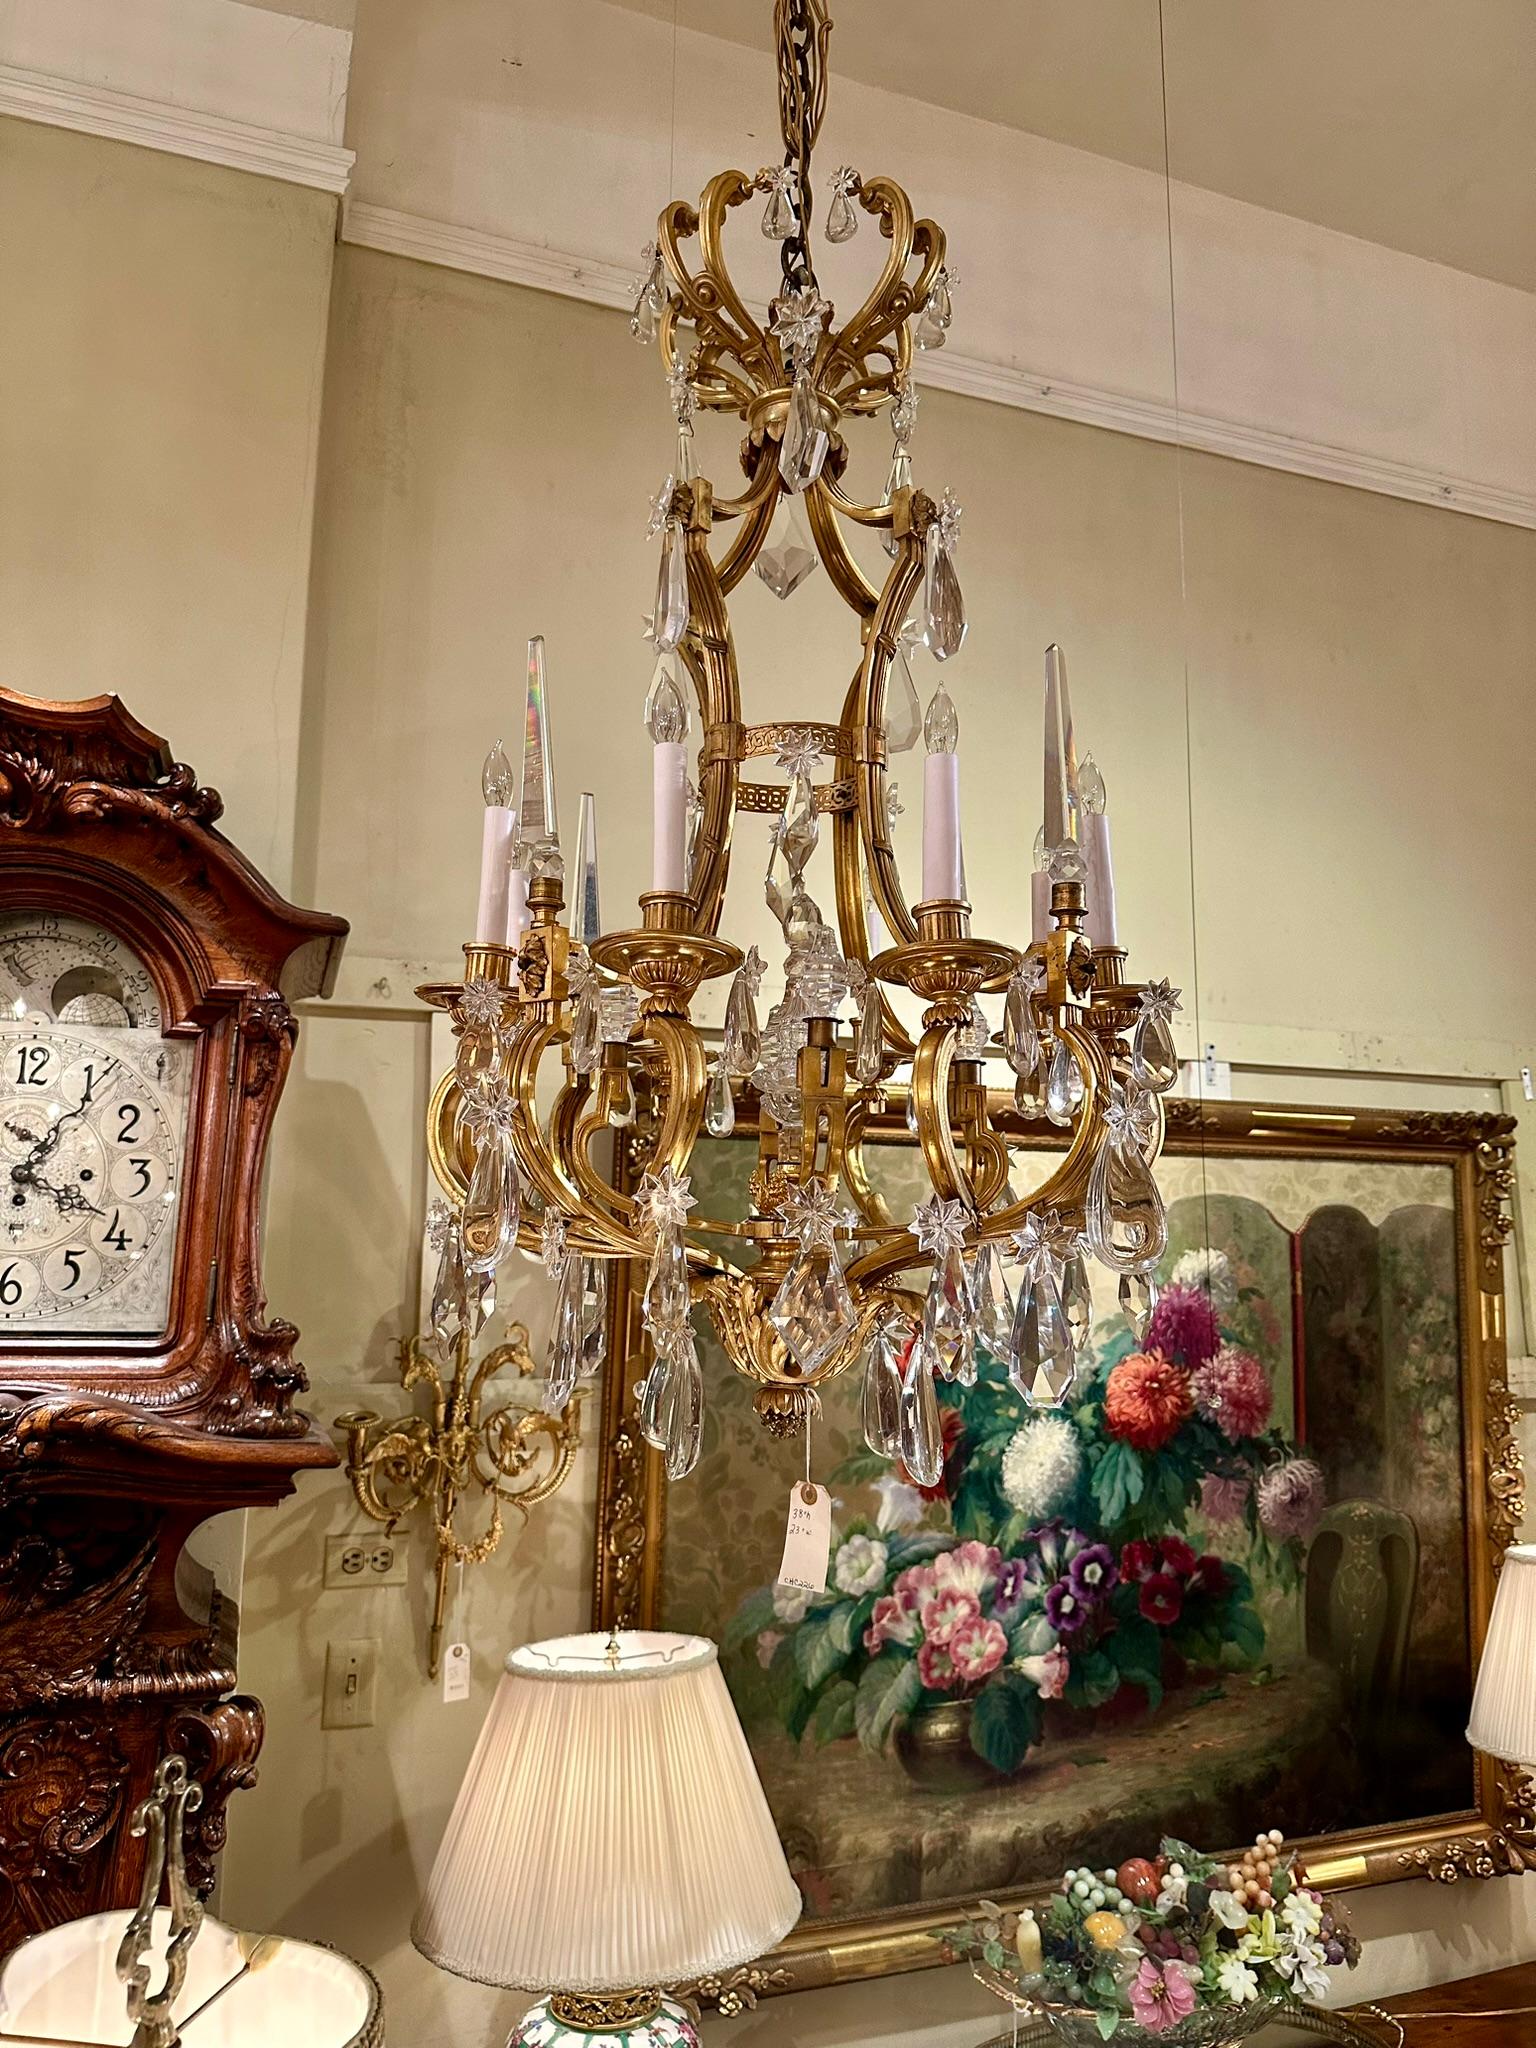 19th Century Antique French Ormolu Bronze and Cut Crystal Chandelier, Circa 1860-1870. For Sale